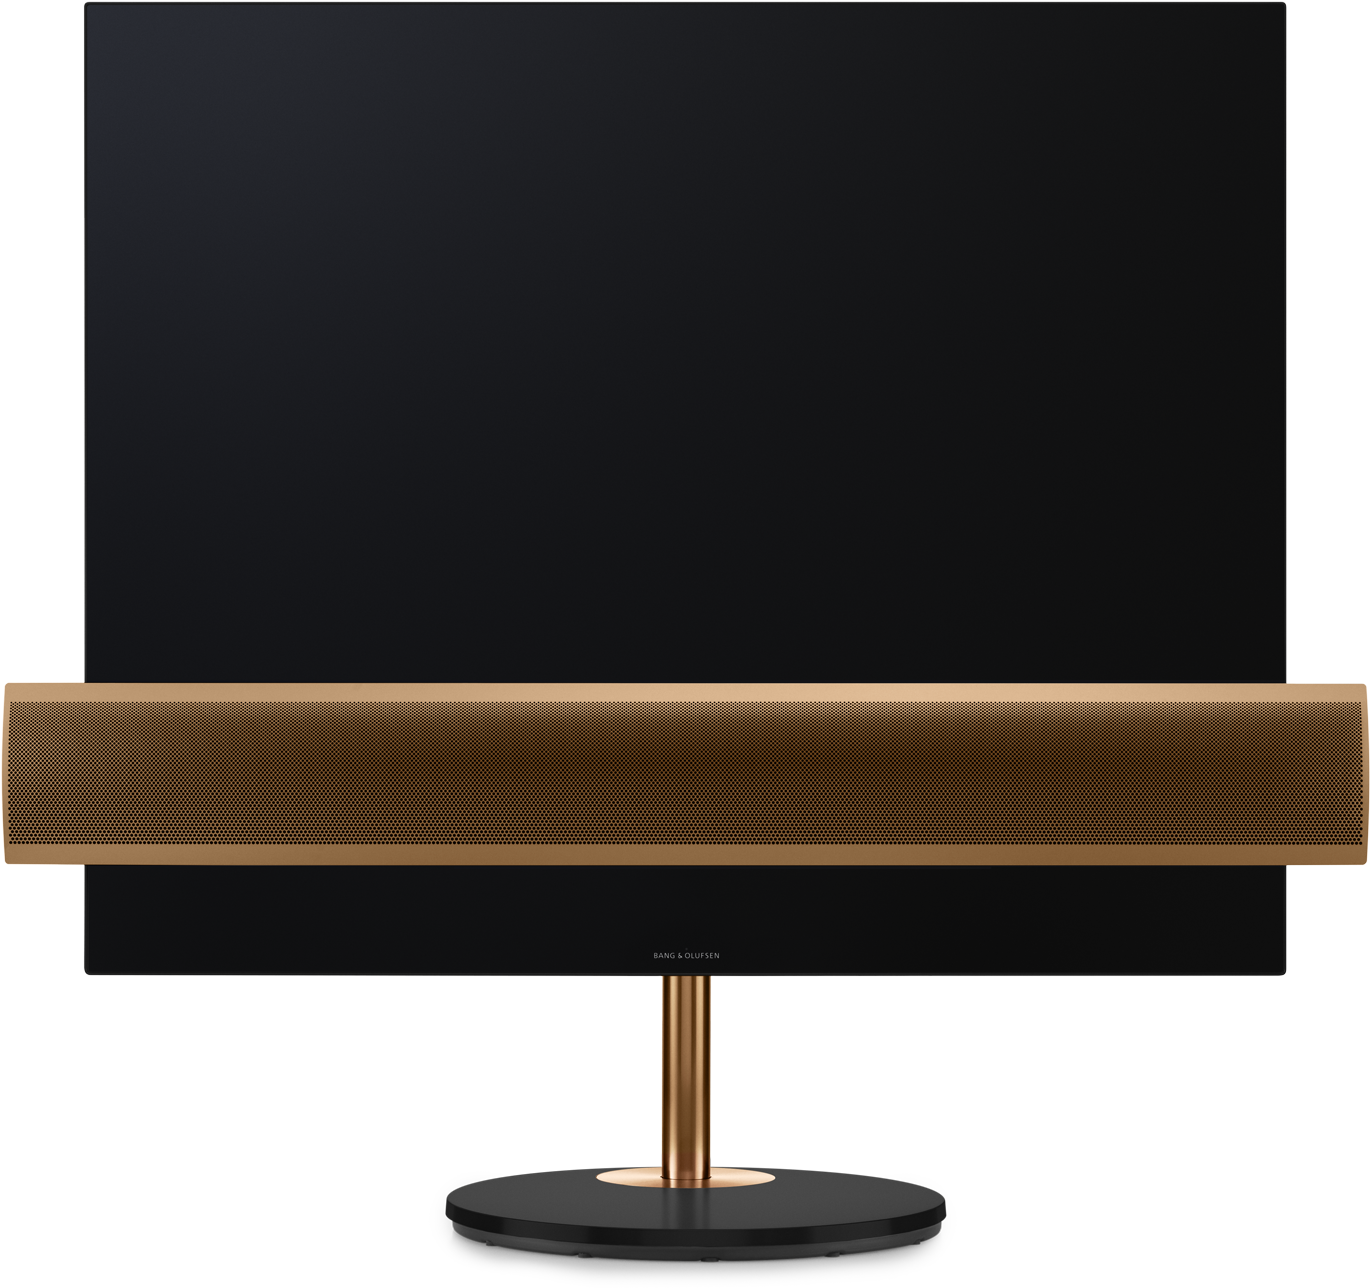 A Black Screen With A Gold Base